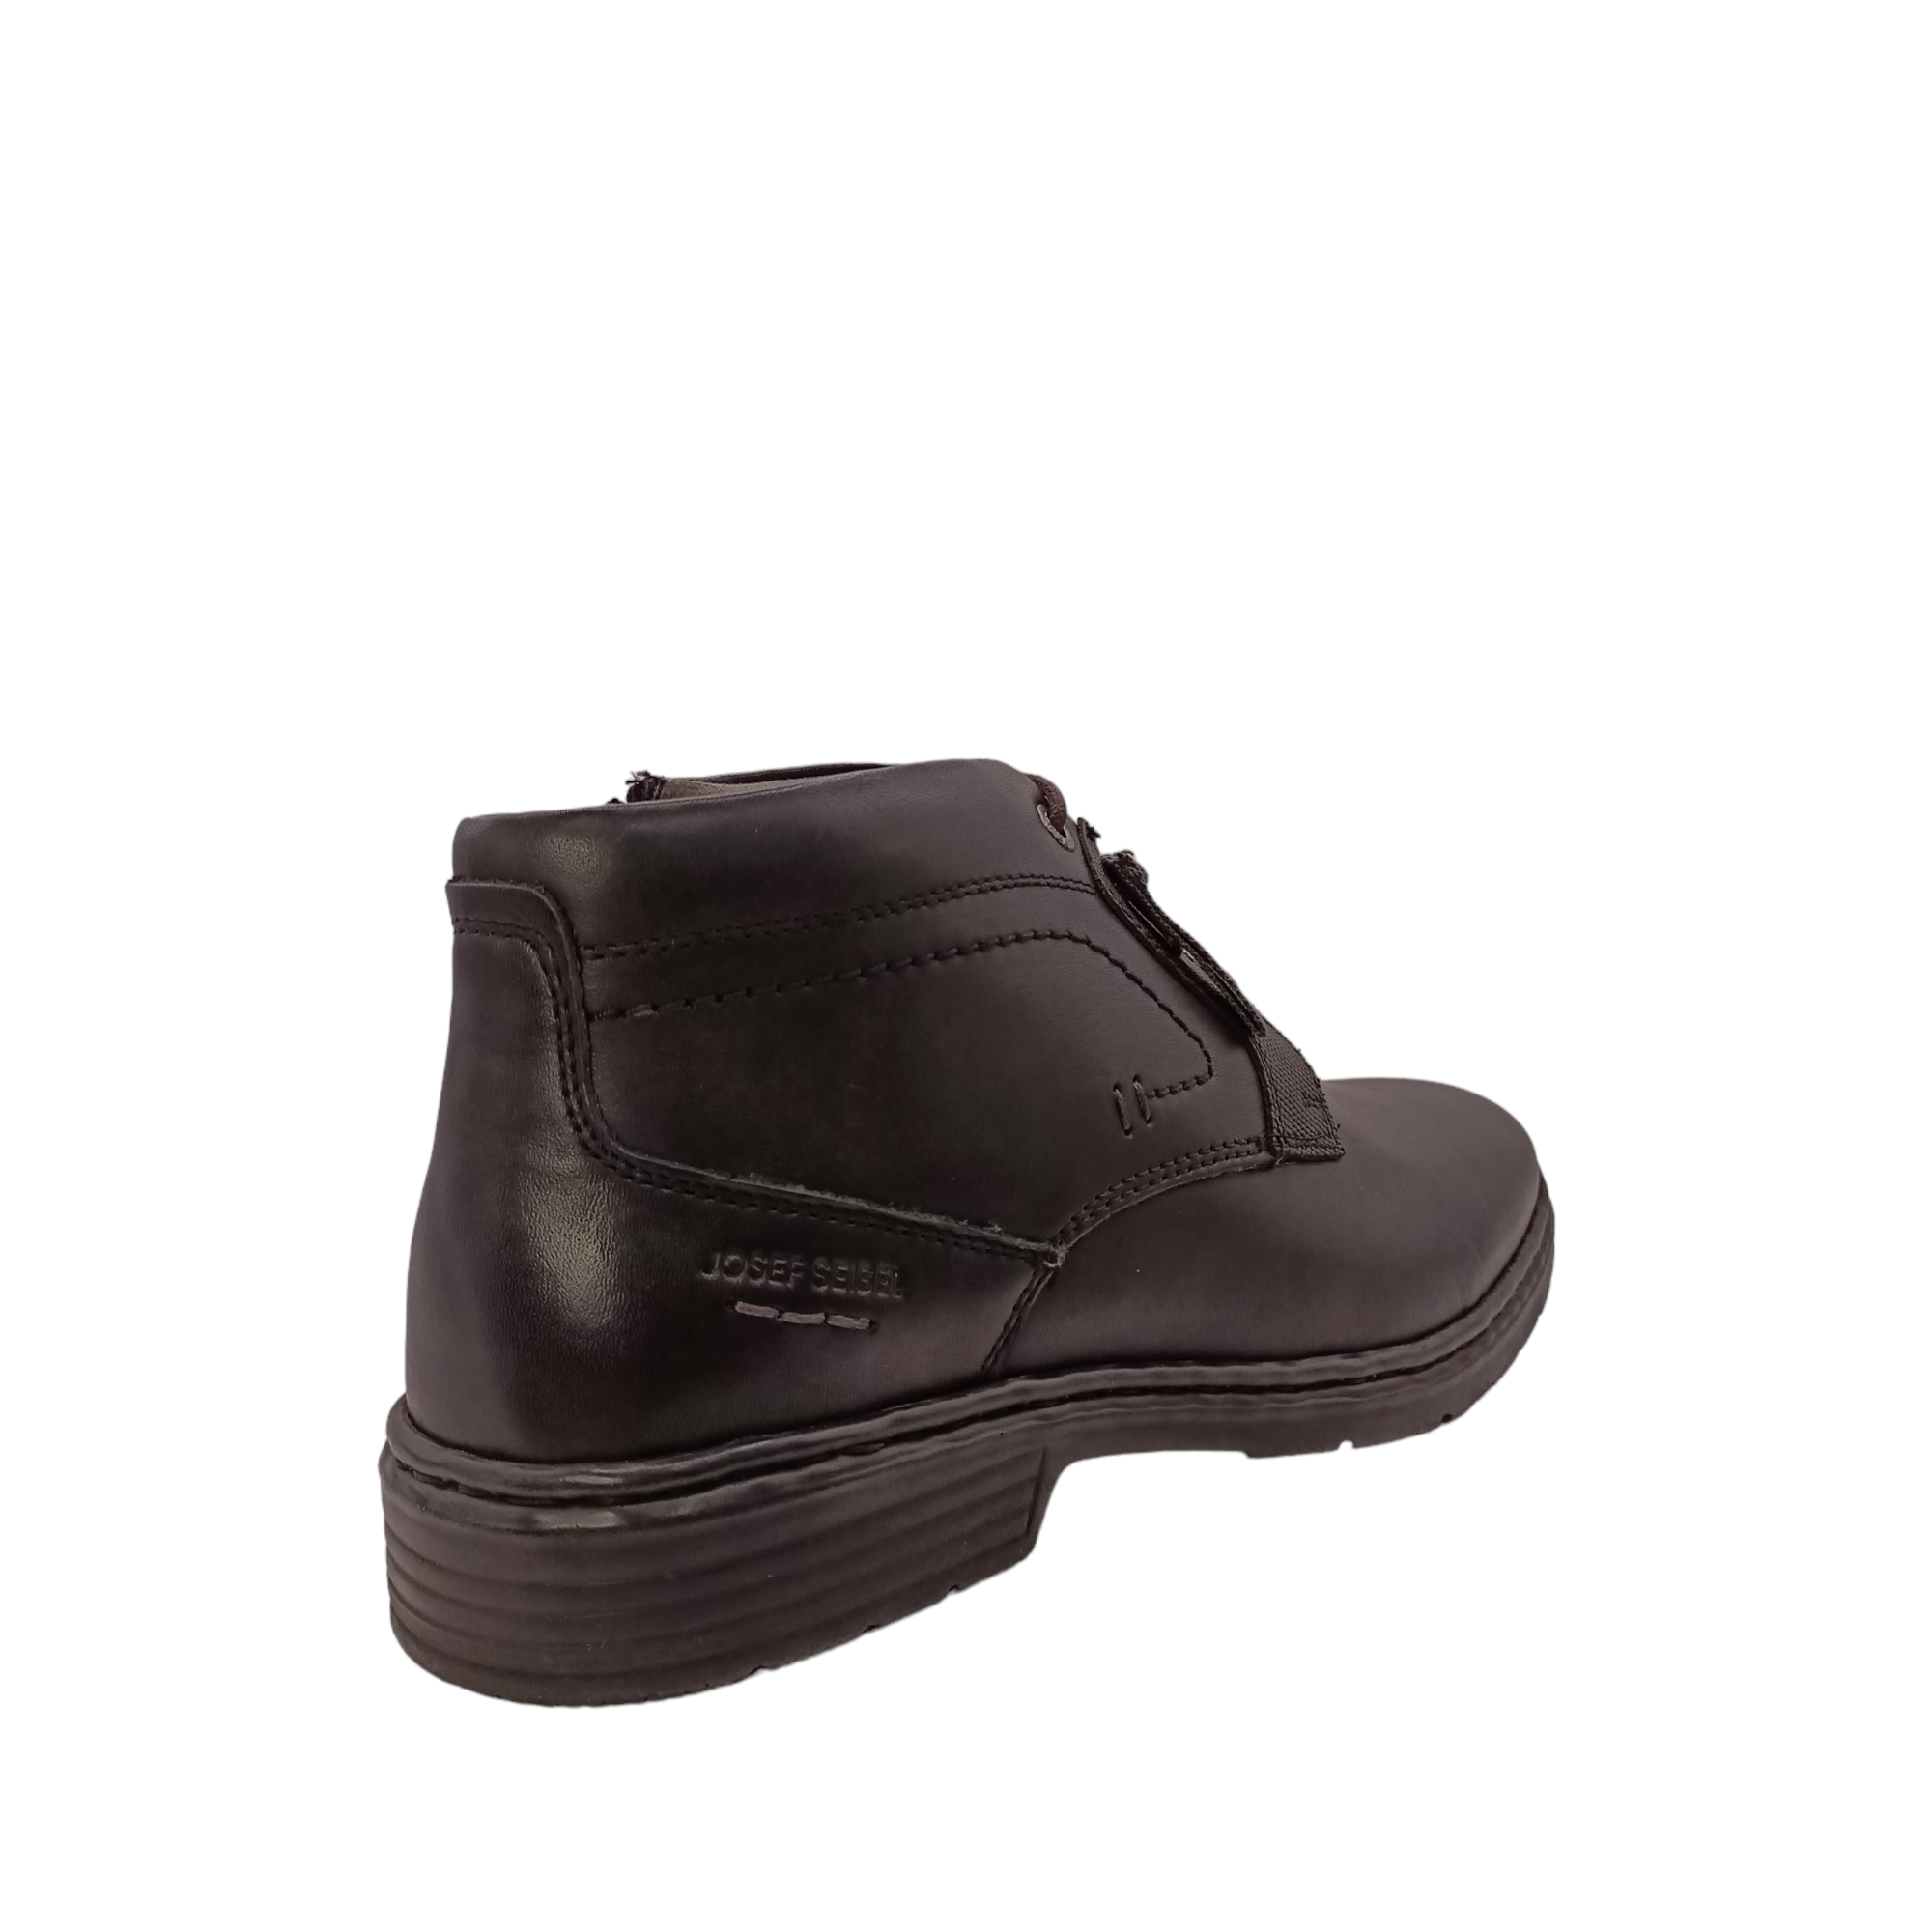 Back view of Black Anvers 17 Josef Seibel boot. Hand stitched details with laces up front and a side zip on the inner side of boot. Shop Mens Boots online and in-store with shoe&me Mount Maunganui Tauranga.